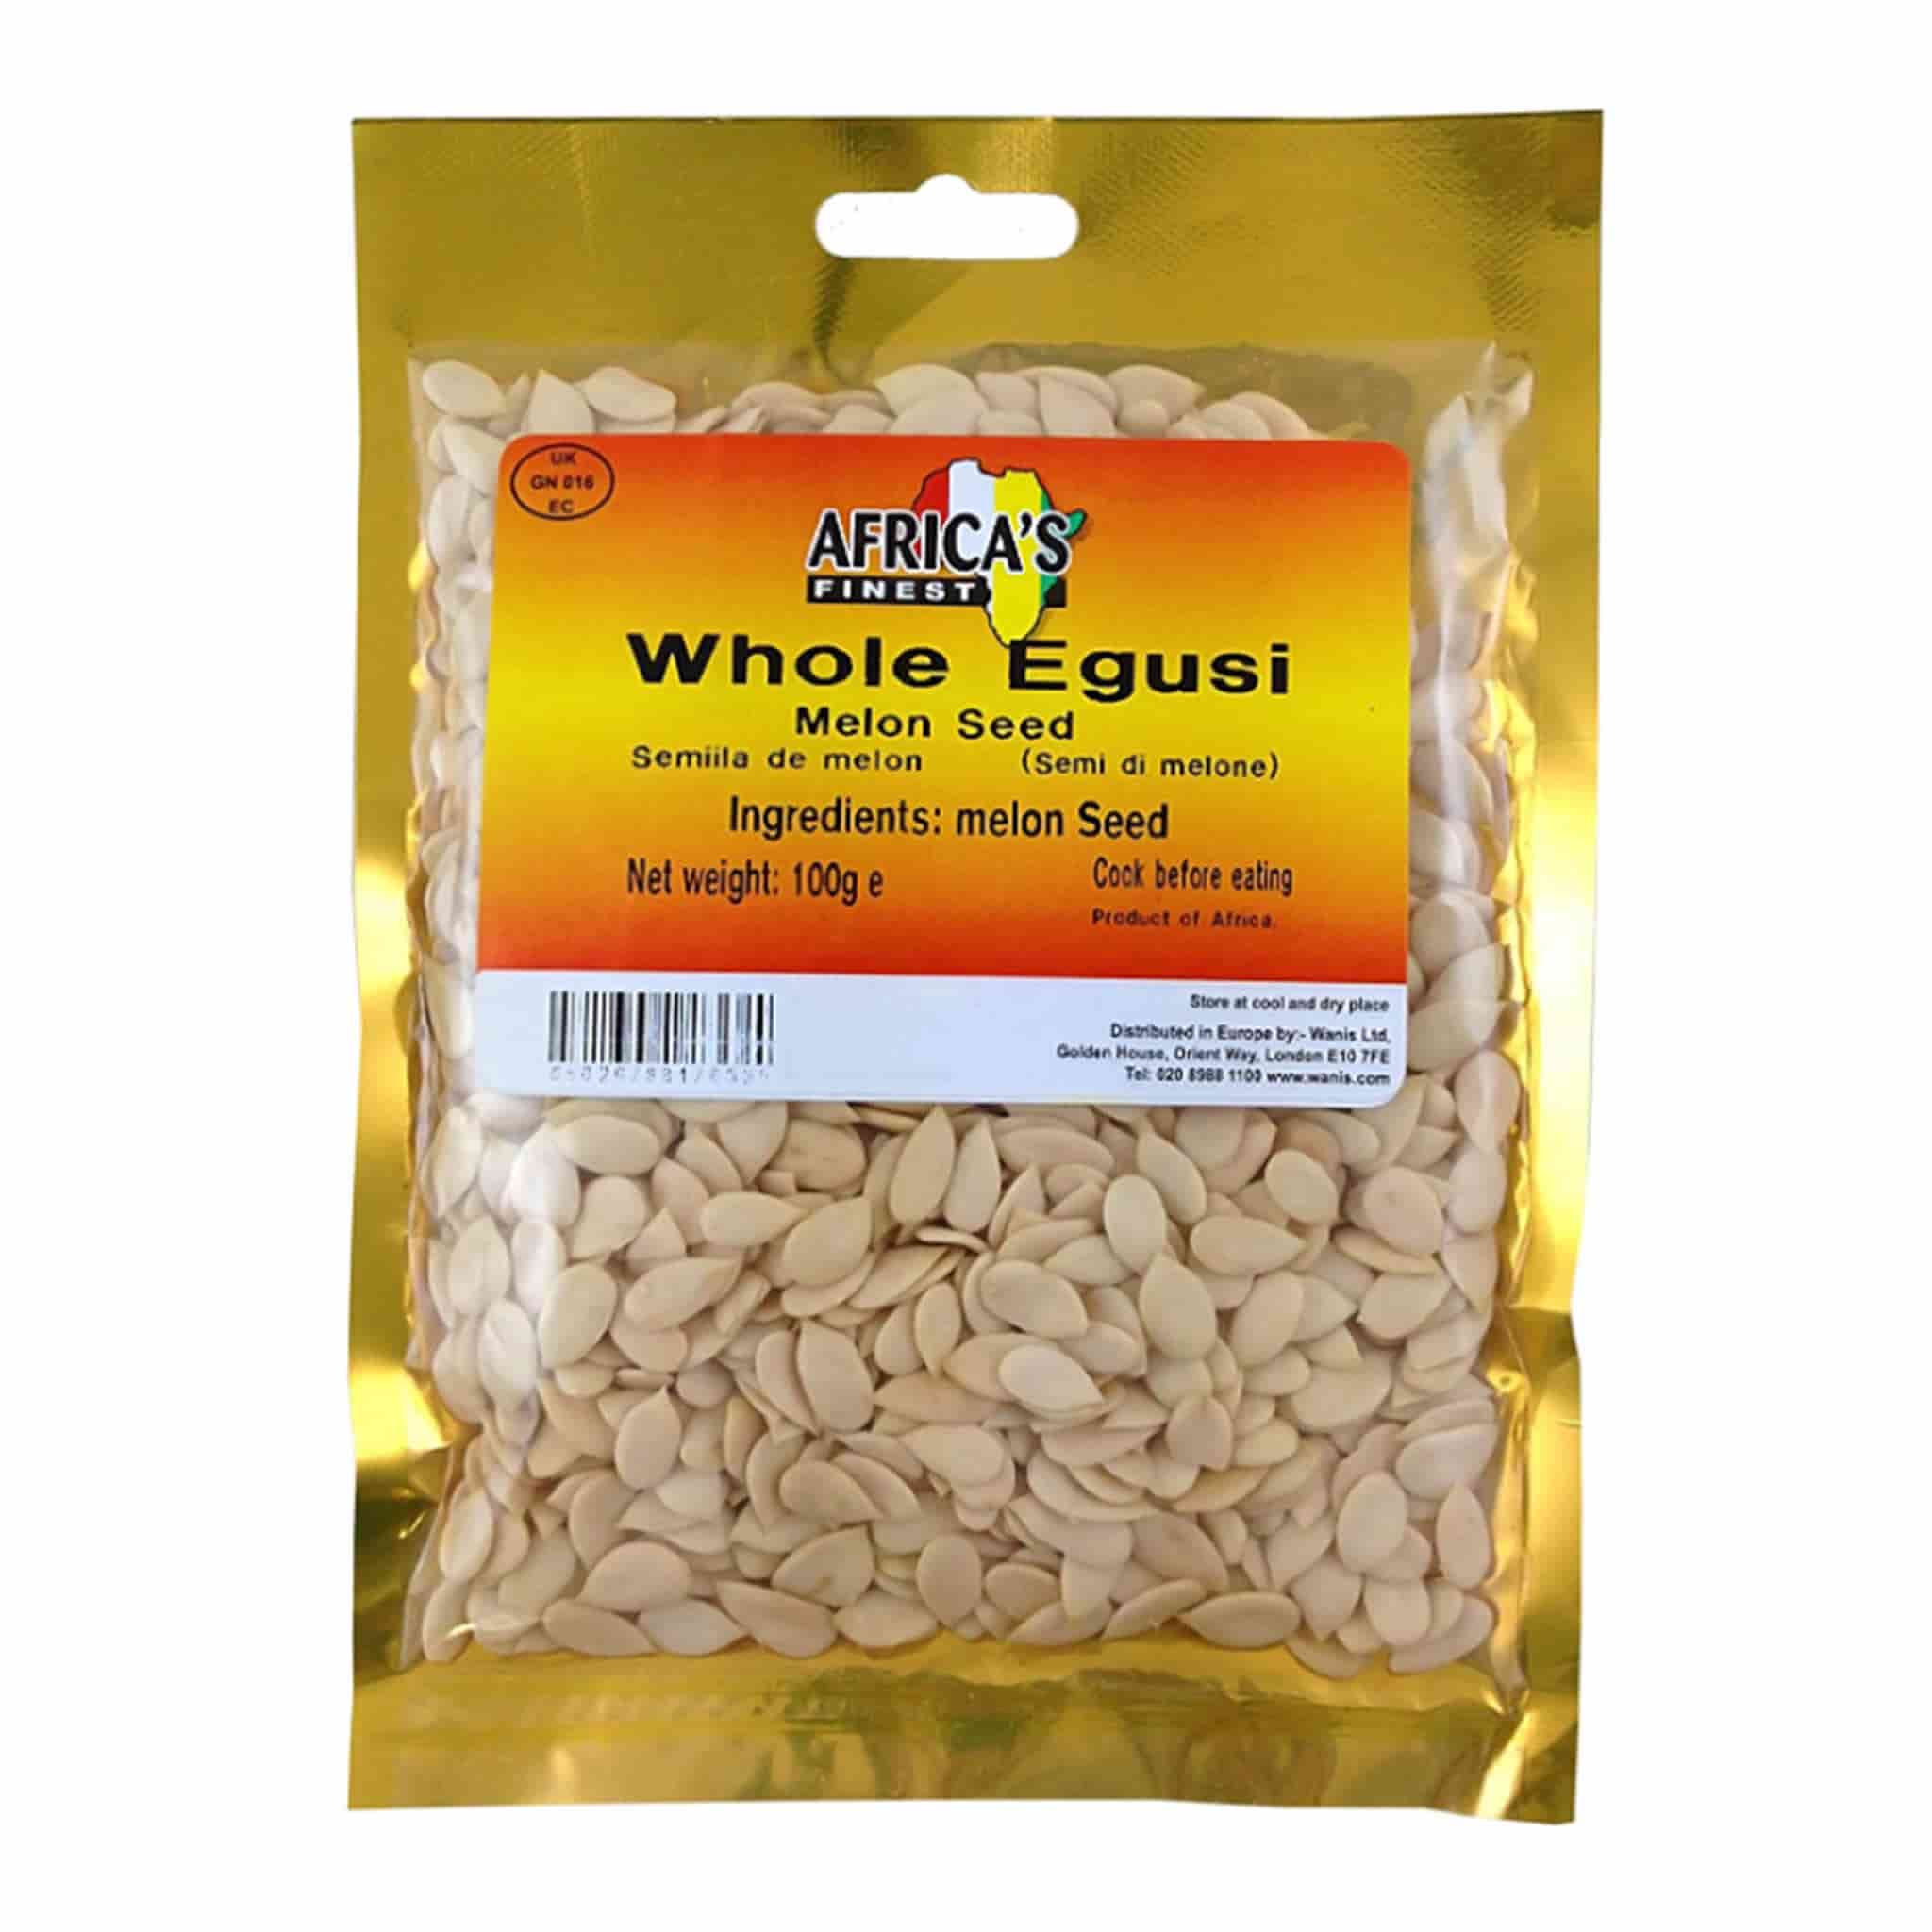 Africas Finest Whole Egusi, 200g